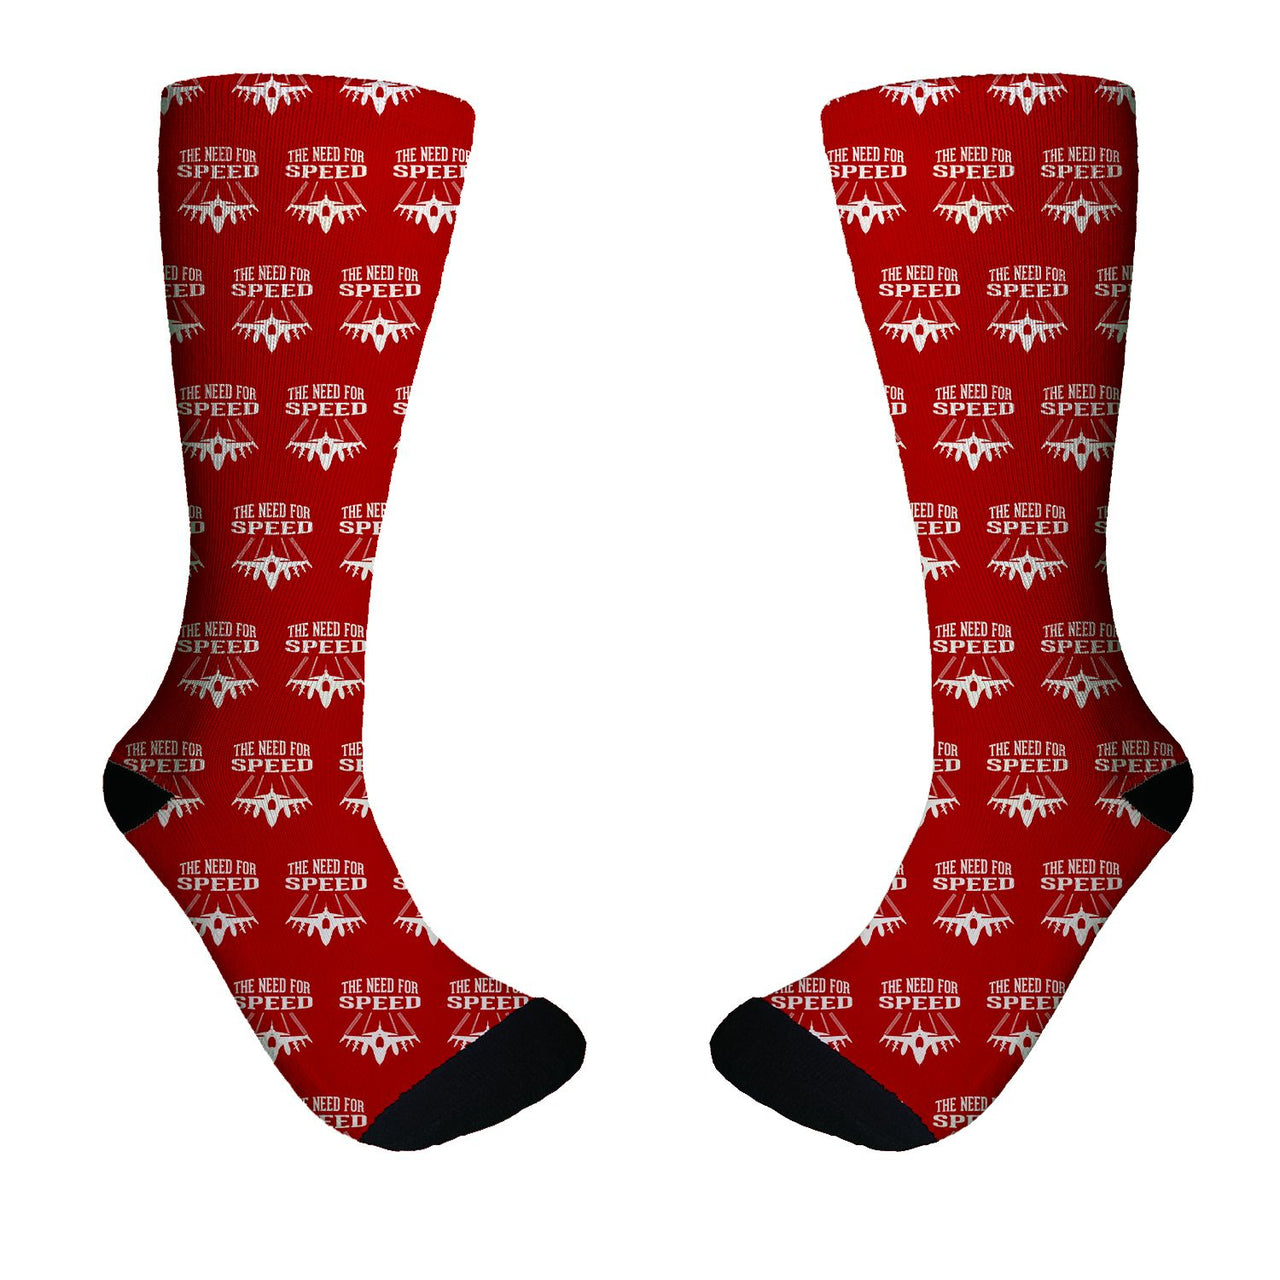 The Need For Speed Designed Socks